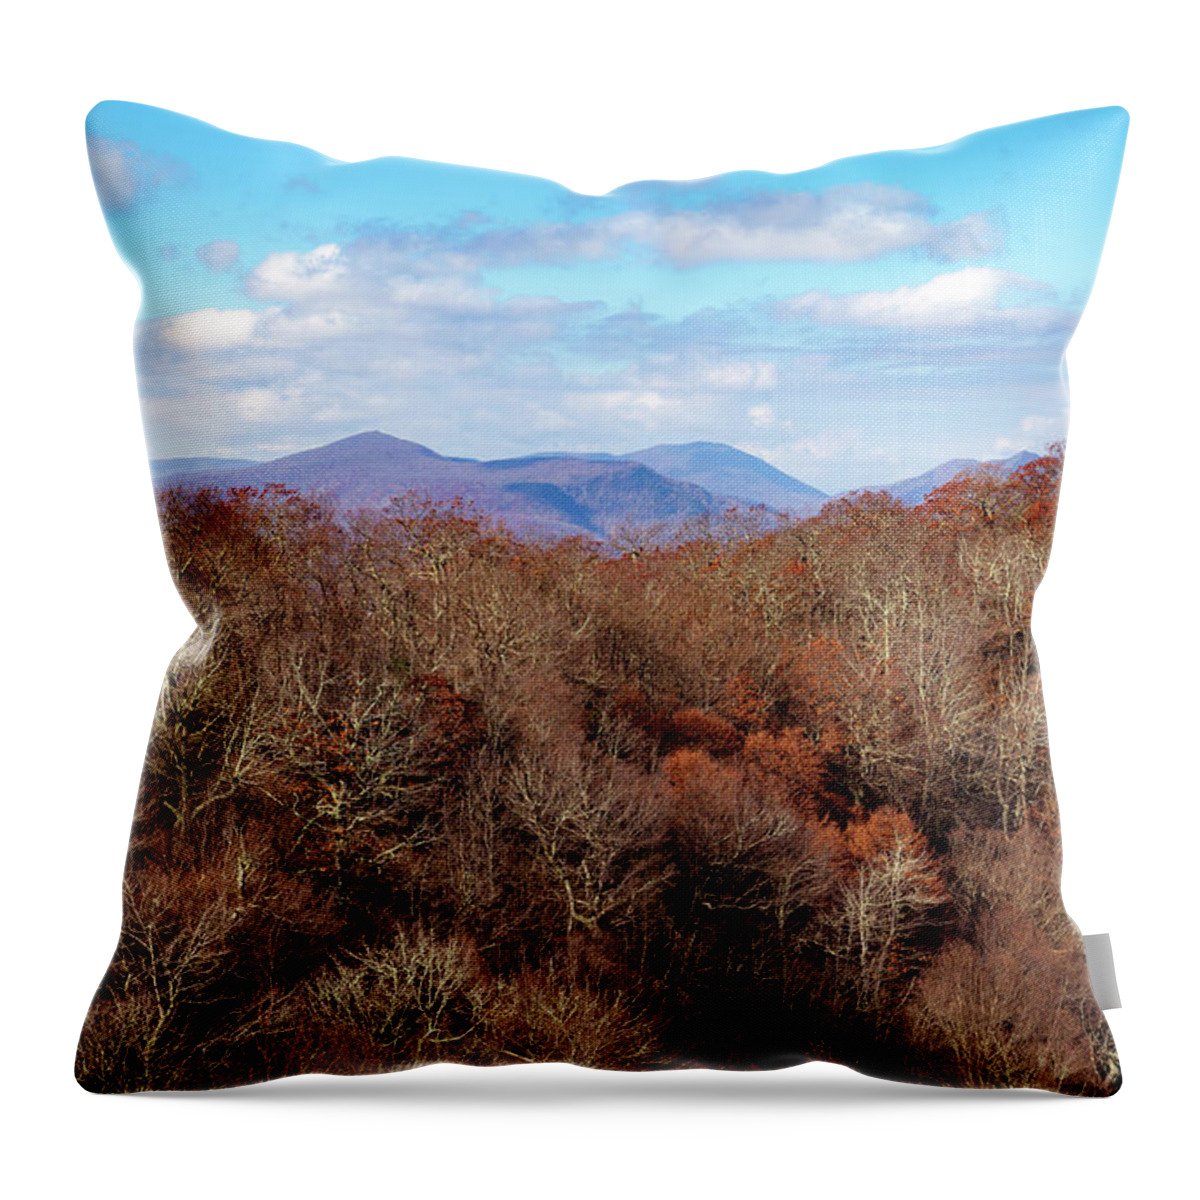 Mountains Throw Pillow featuring the photograph Mount Jefferson View by Cindy Robinson